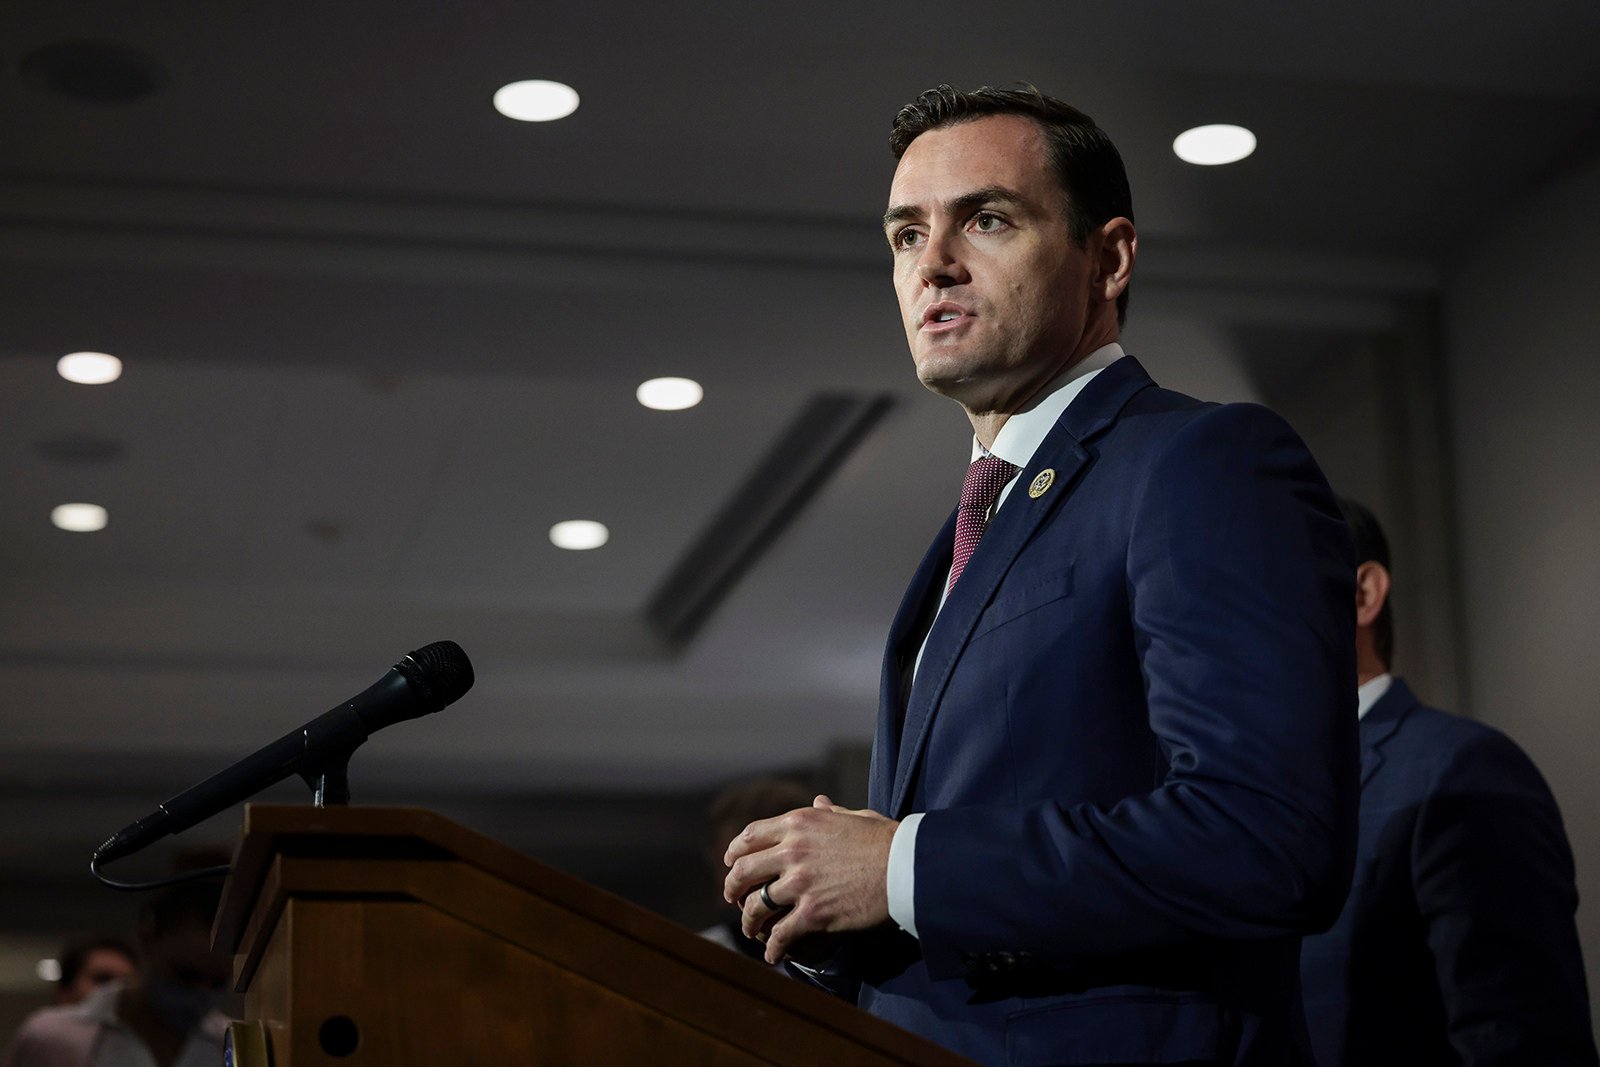 US Representative Mike Gallagher, the chairman of the House select committee on China, has sought information from the Pentagon and Alfred University in upstate New York. Photo: Getty Images/TNS